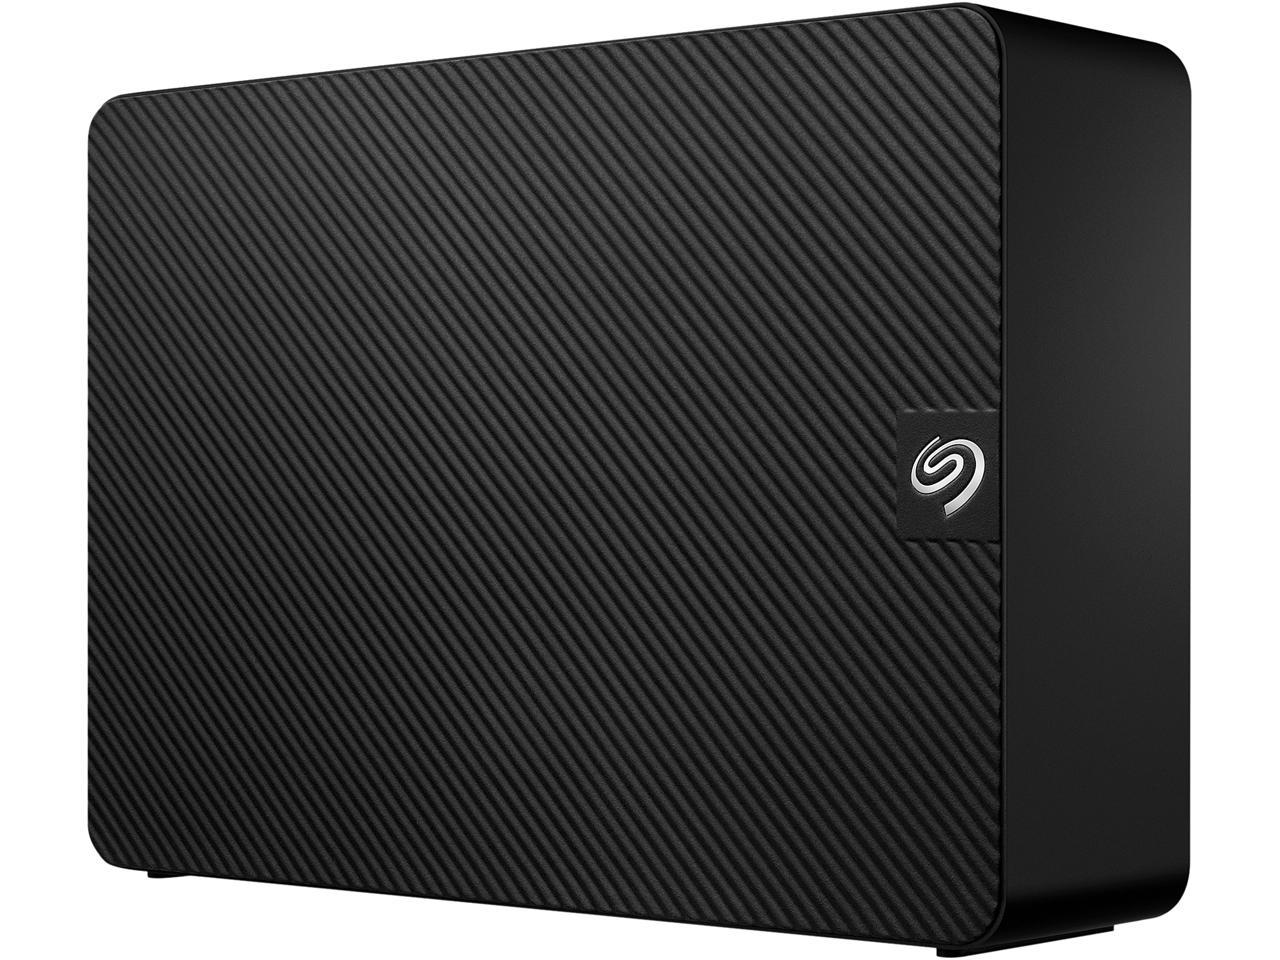 14TB Seagate Expansion External Hard Drive w/Recovery svcs @Newegg $180